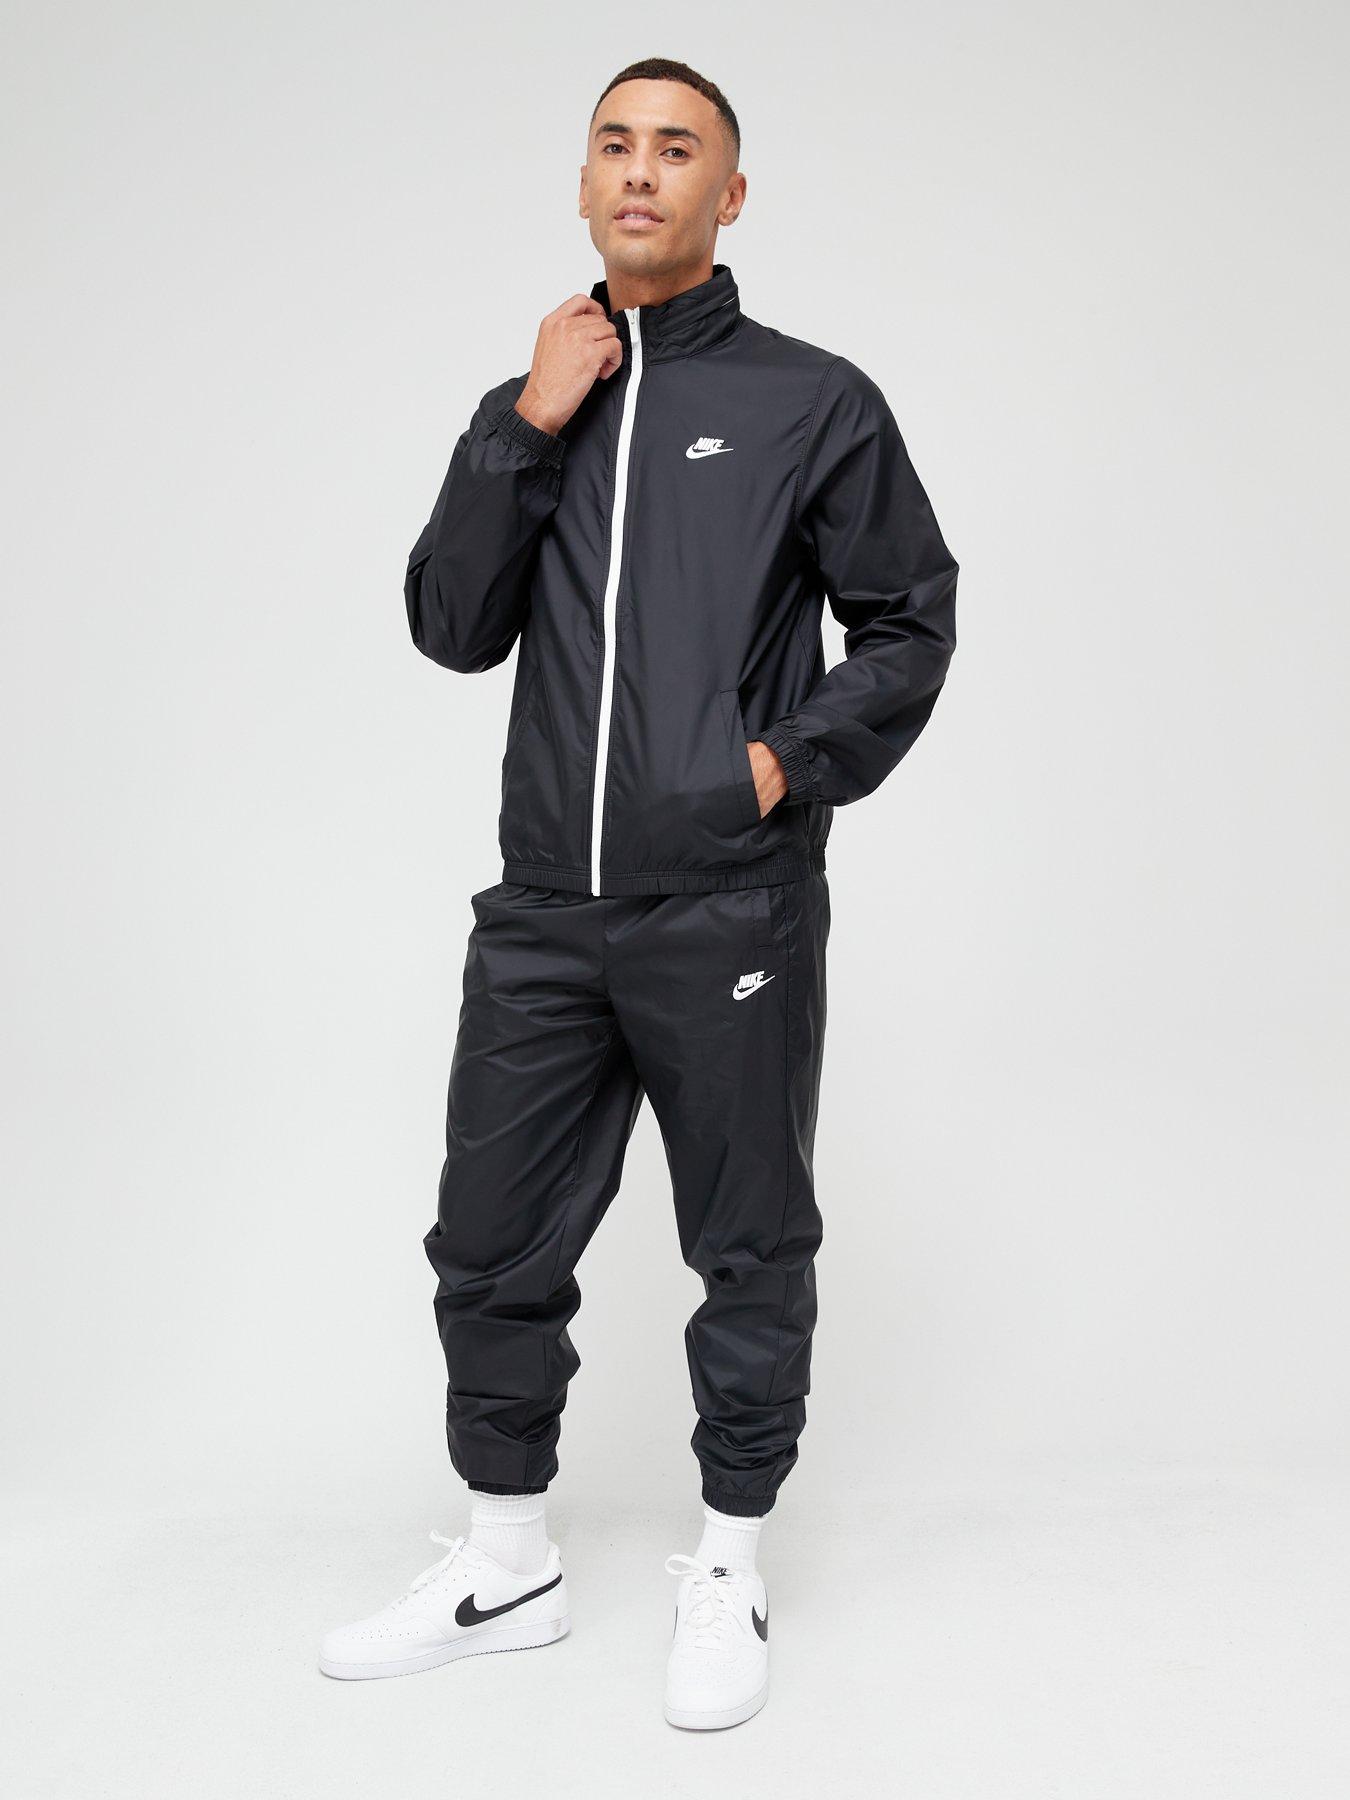 Onderscheppen Ringlet Chaise longue Nike NSW Lined Woven Tracksuit - Black/White | Very Ireland